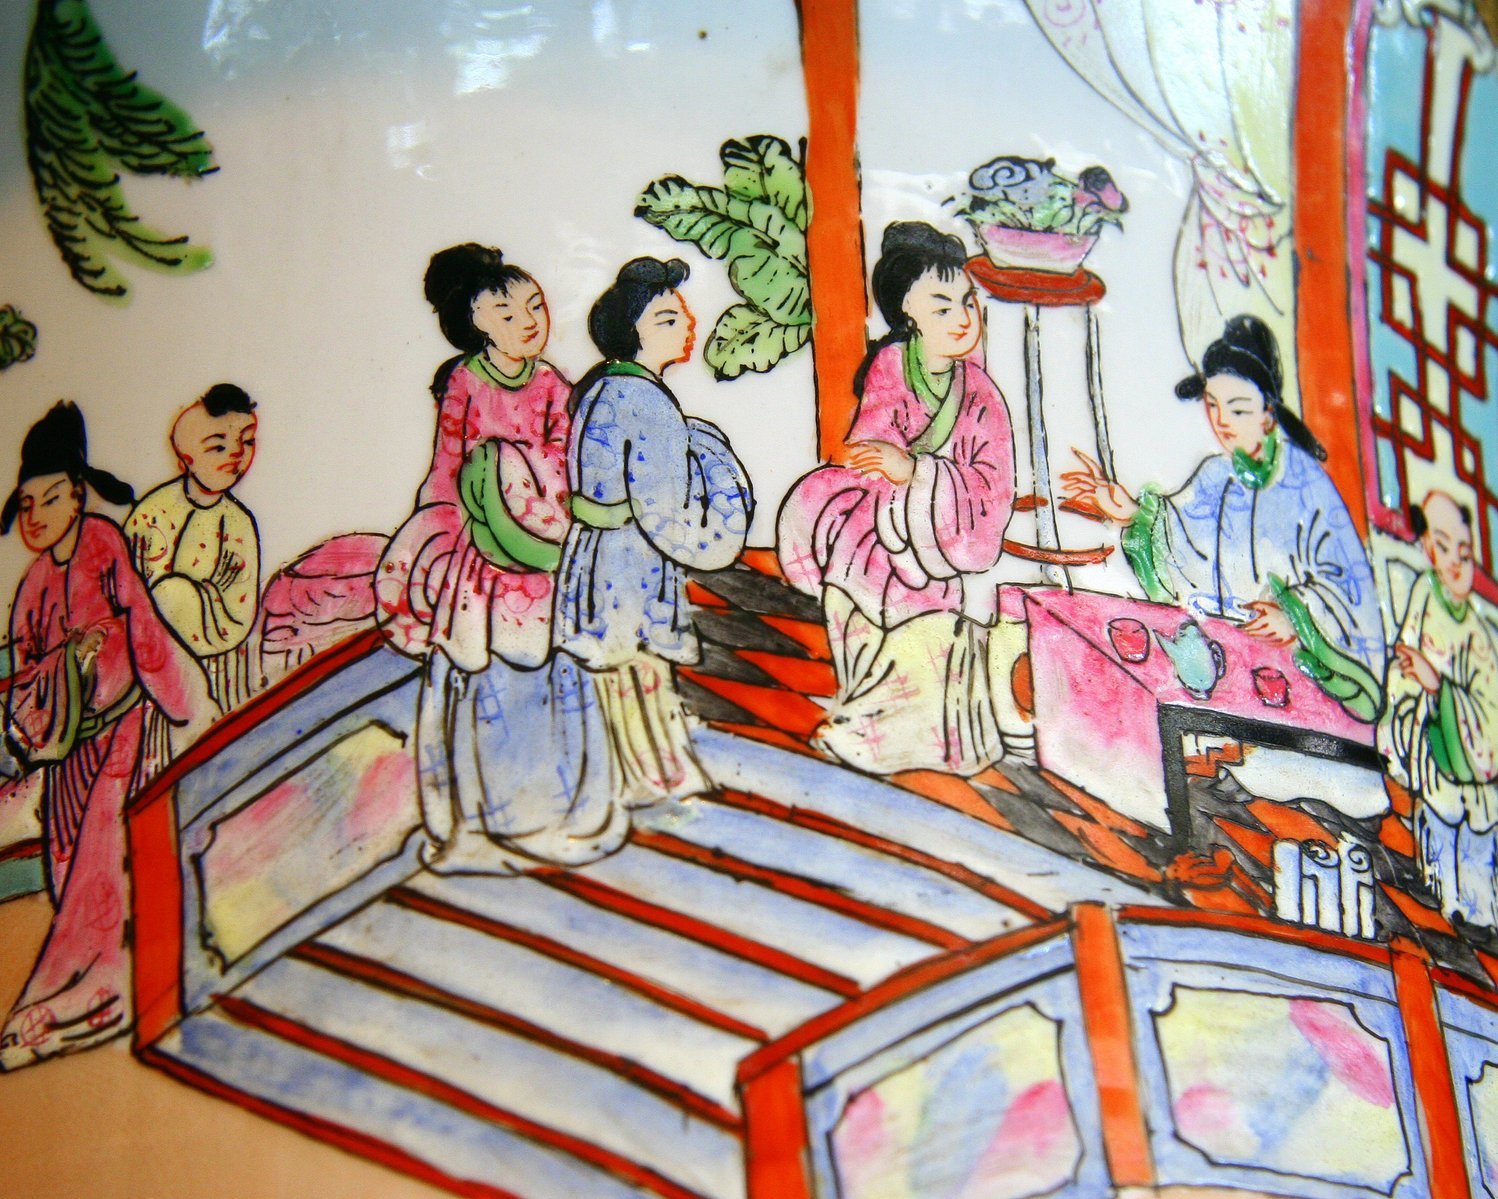 the oriental painting shows many people in the background